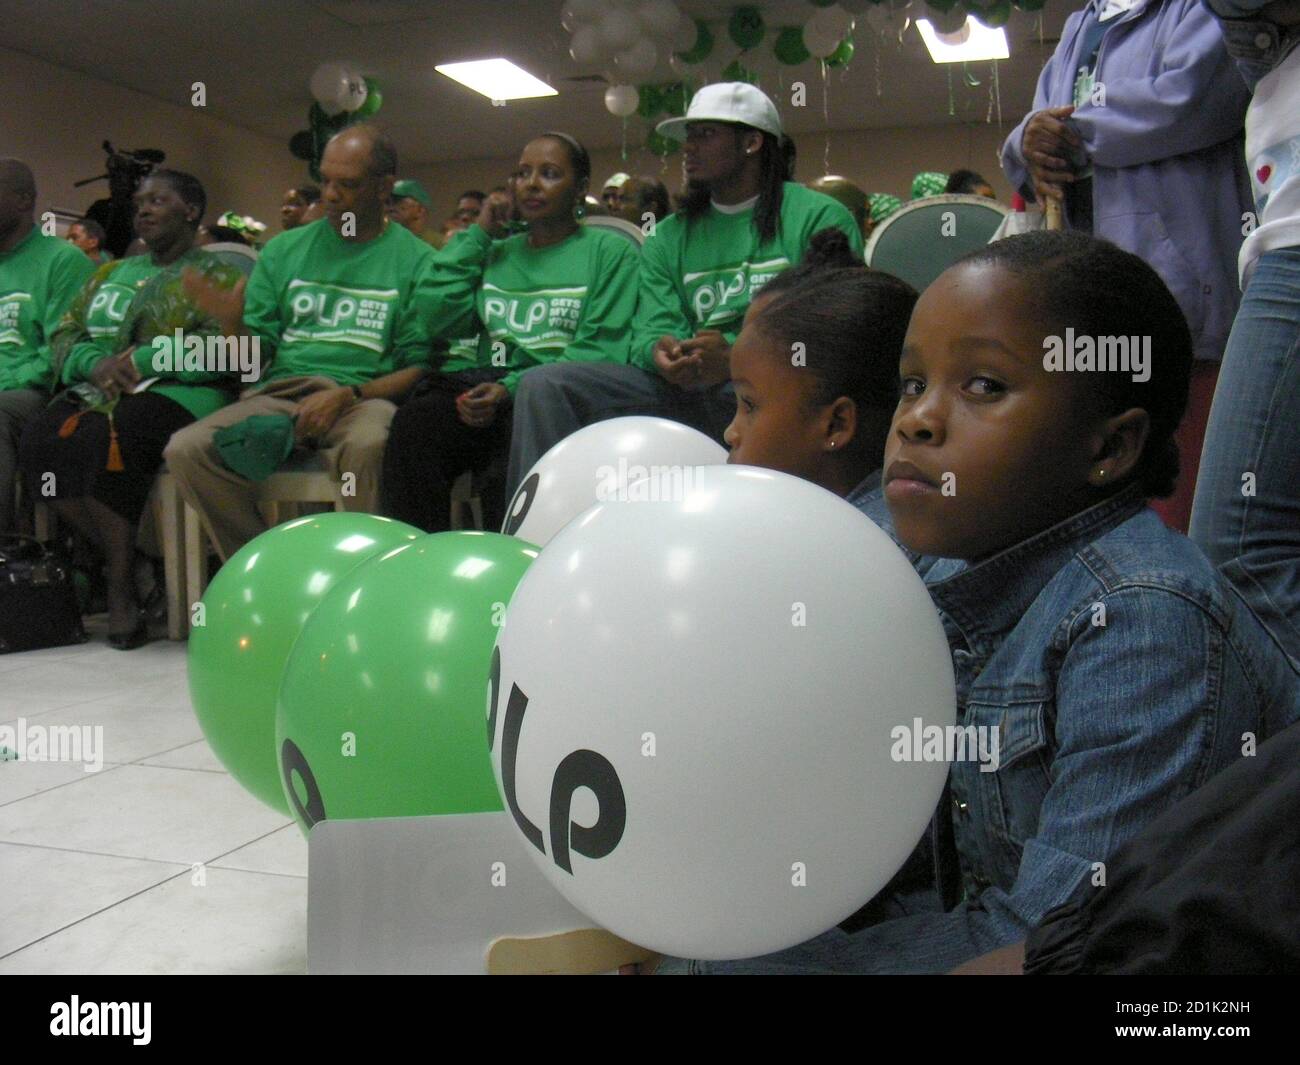 A girl holds a balloon at an election rally of Bermuda's ruling Progressive Labour Party in the capital of Hamilton, December 18, 2007. Bermuda is due to hold general elections on Tuesday in which the ruling party is bidding for a third term in office.   REUTERS/Matthew Bigg   (BERMUDA) Stock Photo